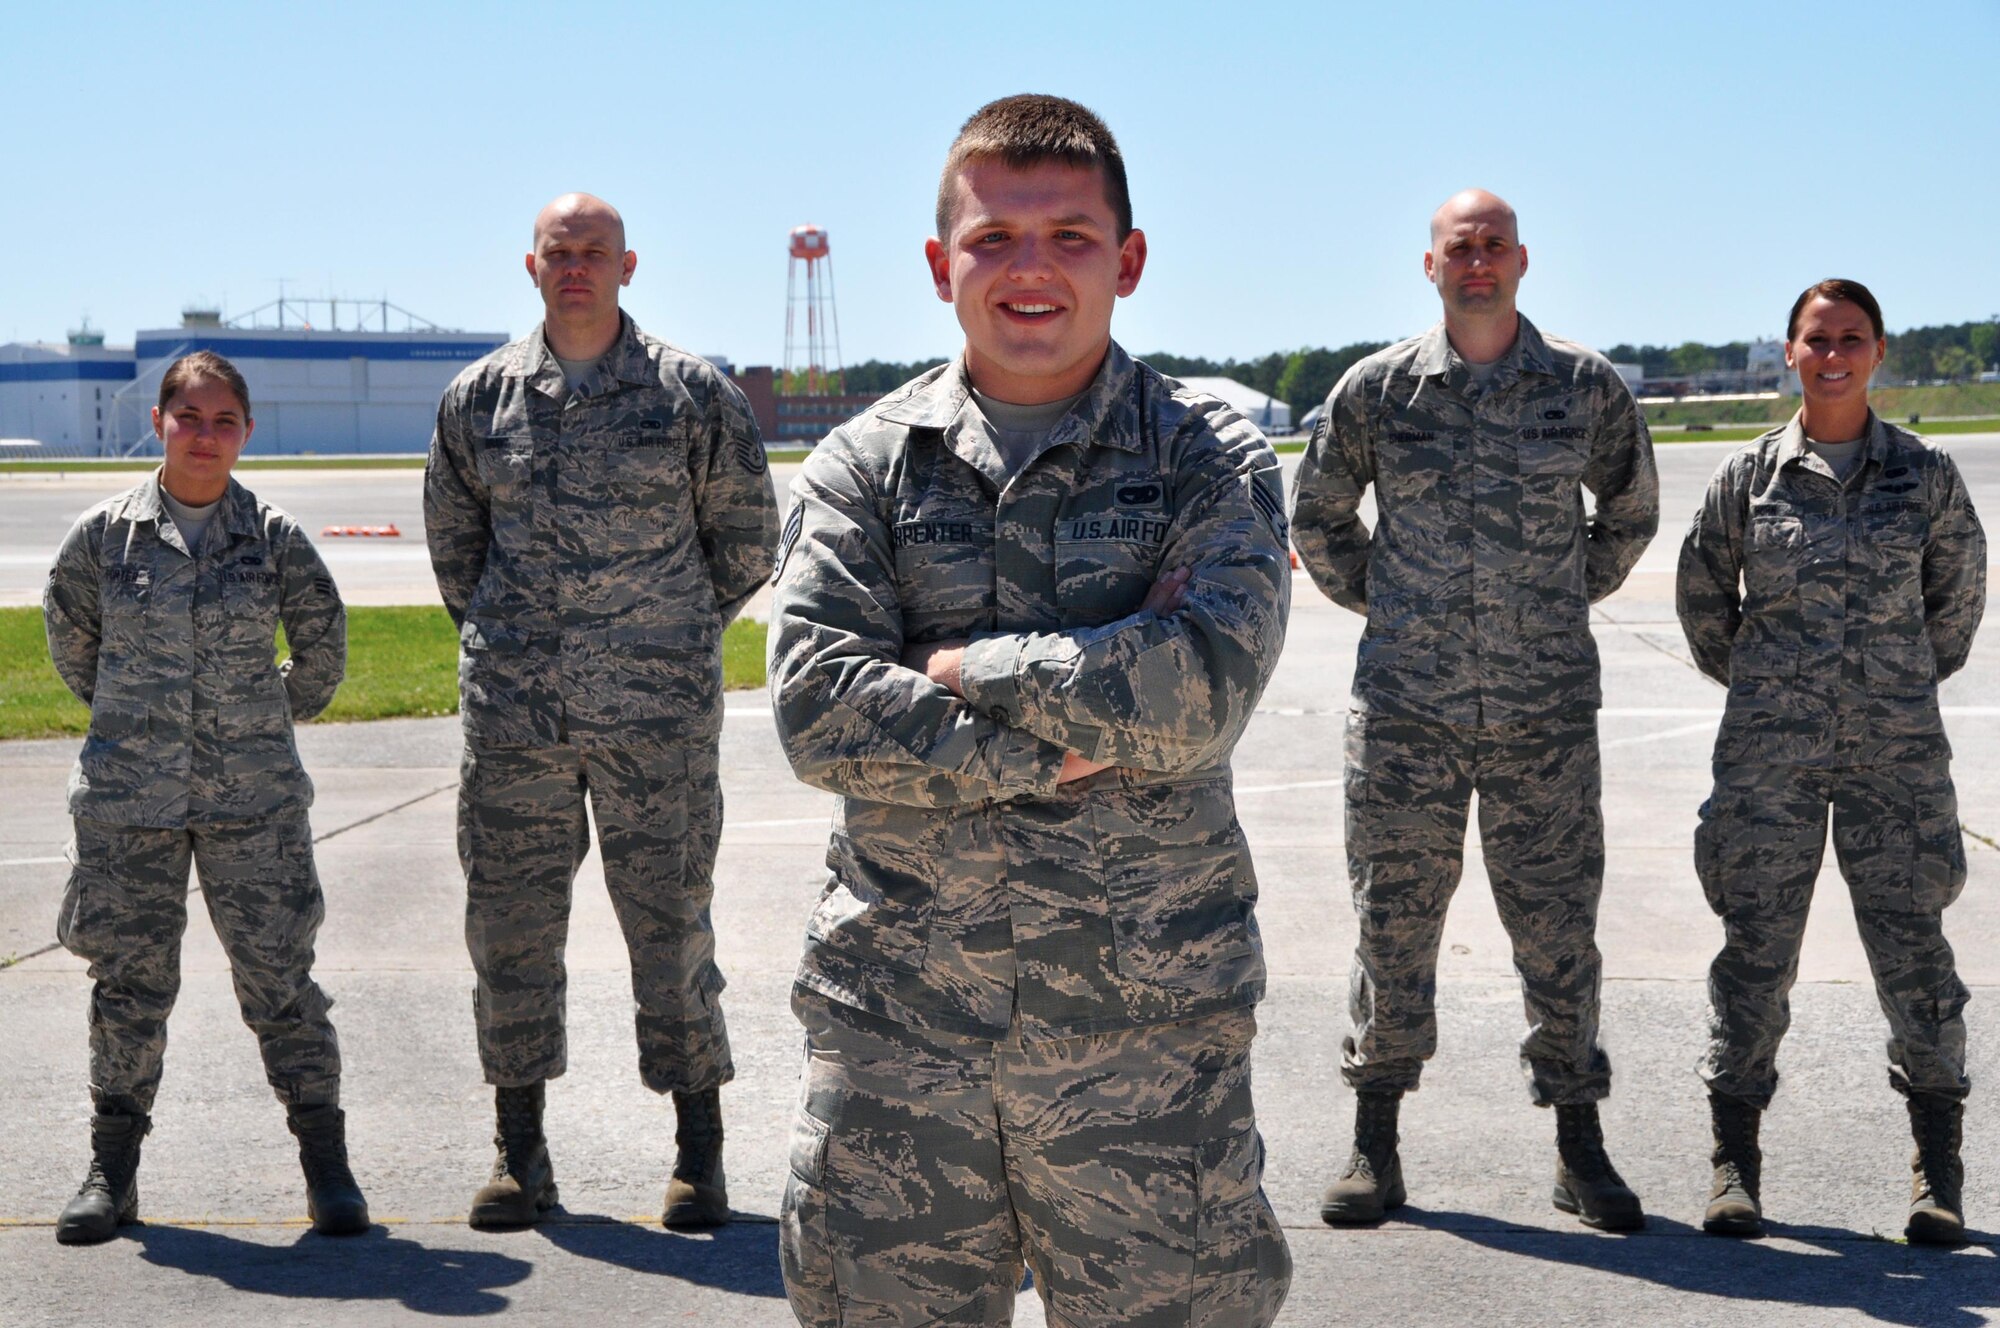 Senior Airman Daniel Carpenter, 80th Aerial Port Squadron air transportation journeyman, received the news of his acceptance into the USAFA, military academy for officer candidates for the U.S. Air Force April 2016. Carpenter plans to become a pilot.